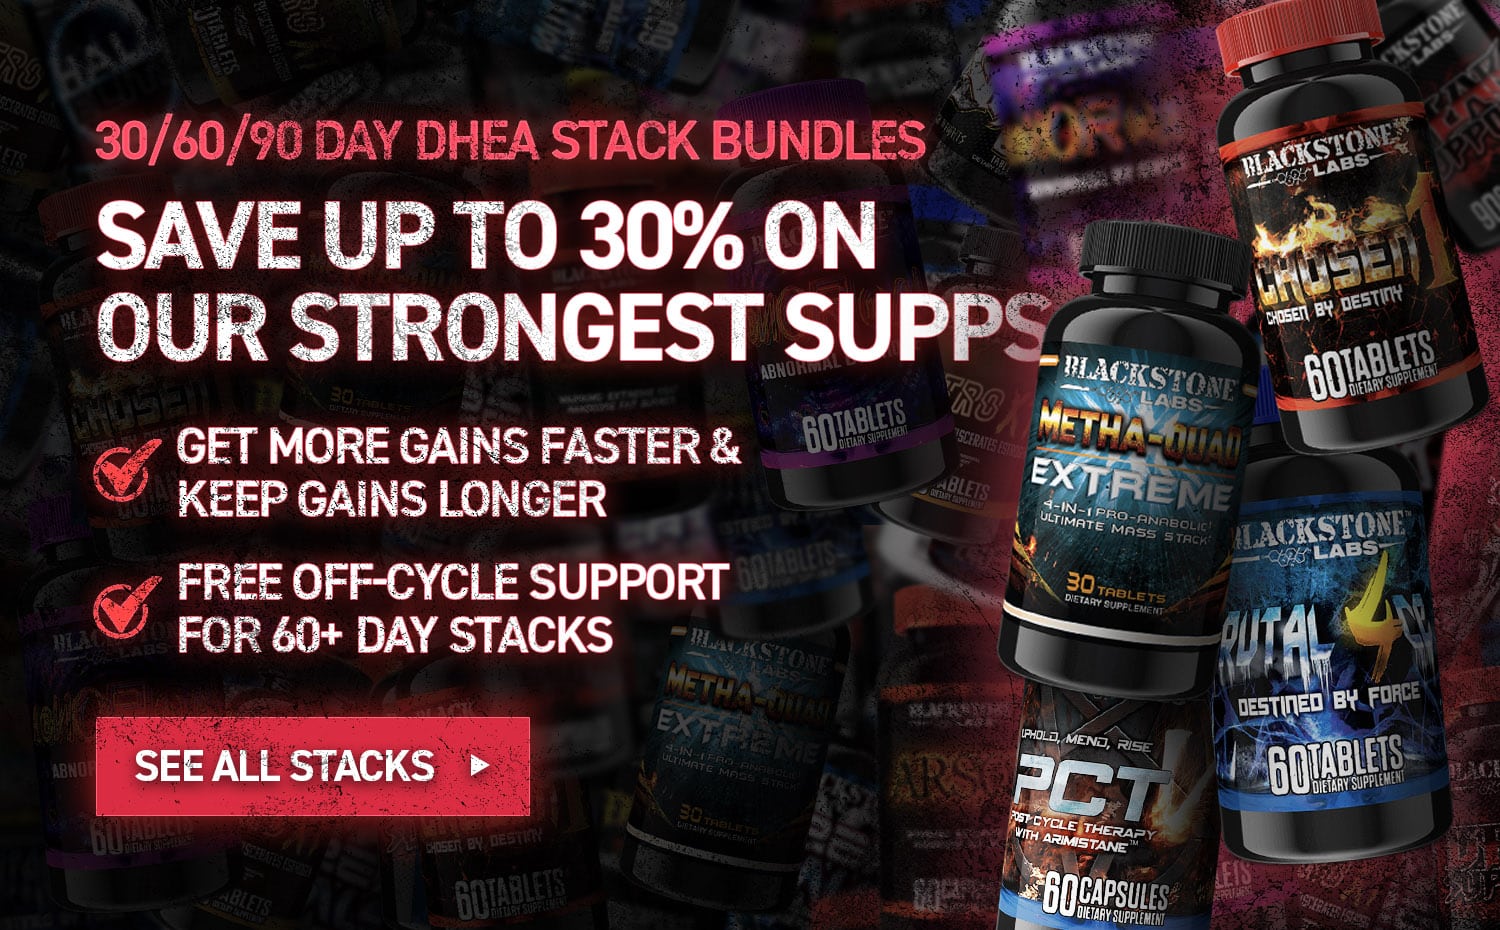 30/60/90 Day DHEA Stack Bundles. Save up to 30% on our strongest supps. Get more gains faster & keep gains longer. Free off-cycle support for 60+ Day Stacks. See All Stacks ->